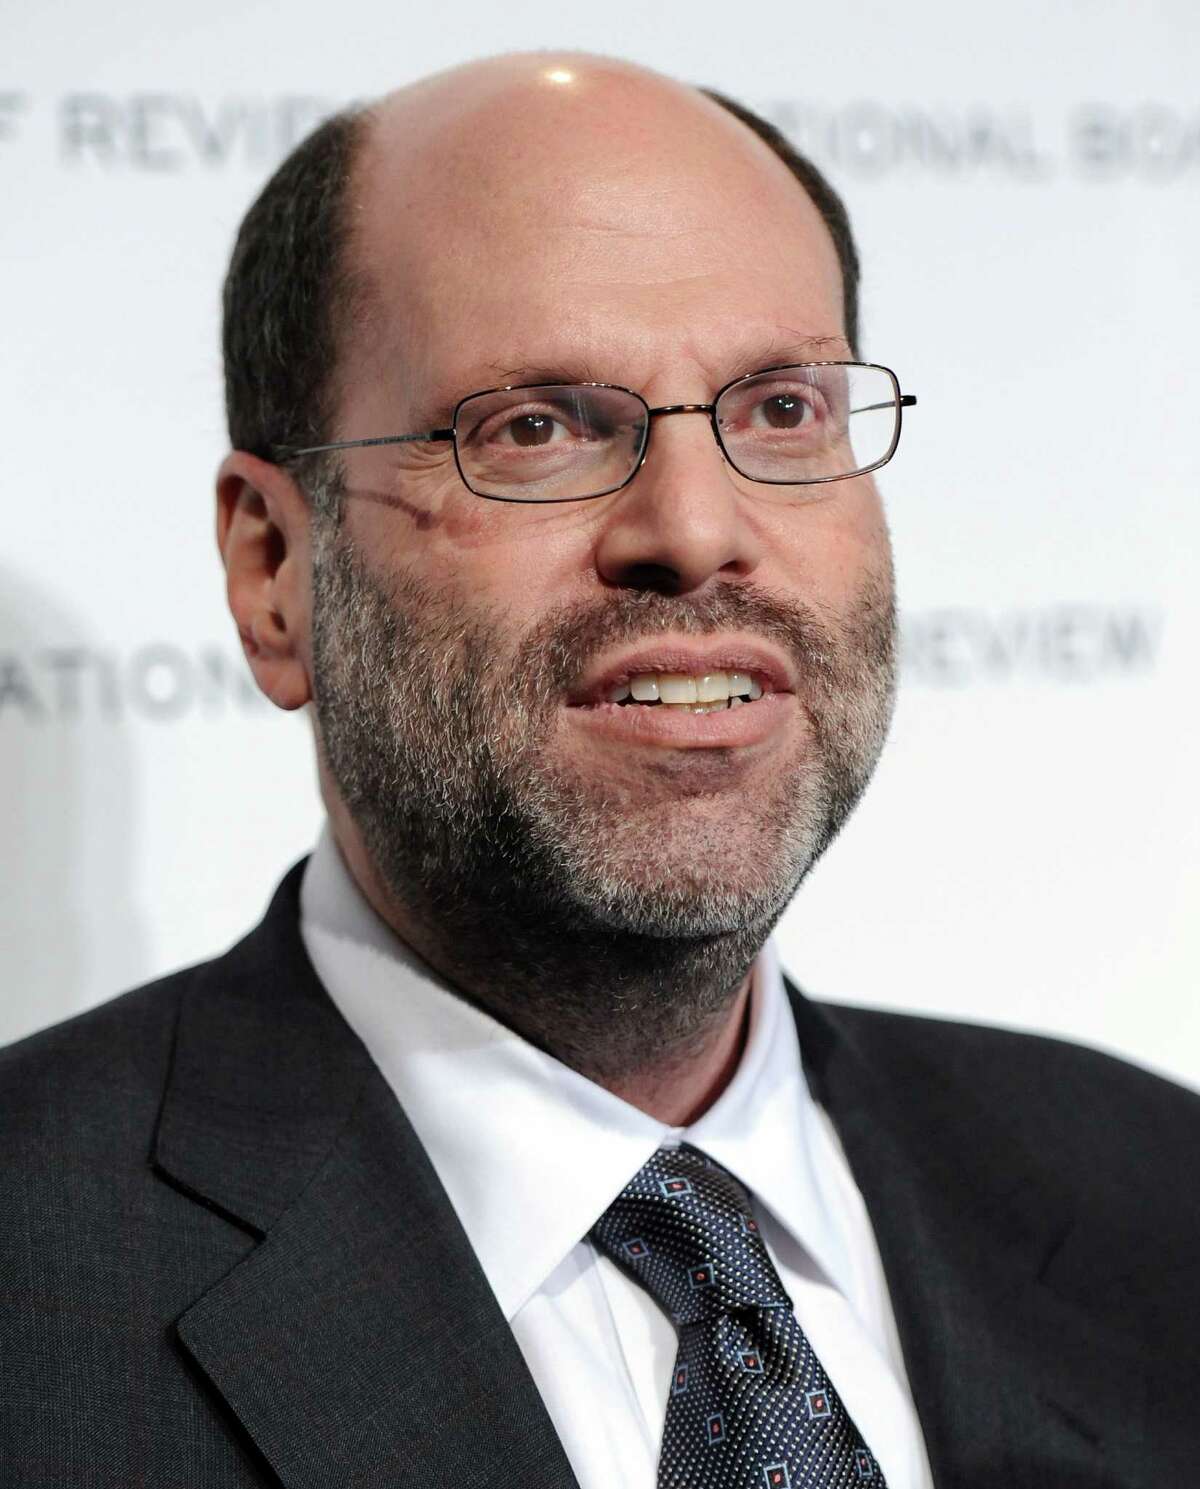 FILE - In this Jan. 11, 2011 file photo, producer Scott Rudin attends The National Board of Review of Motion Pictures awards gala at Cipriani's 42nd Street in New York. Rudin, the high-powered producer at the center of the latest embarrassment stemming from the Sony hacking scandal, has apologized for remarks he made in leaked emails. In the series of private emails obtained by Gawker and Buzzfeed this week, Rudin, corresponding with Sony Pictures Entertainment co-chairman Amy Pascal, called "Unbroken" director Angelina Jolie a "spoiled brat" and made jokes about President Barack Obama's race and presumed taste in movies.